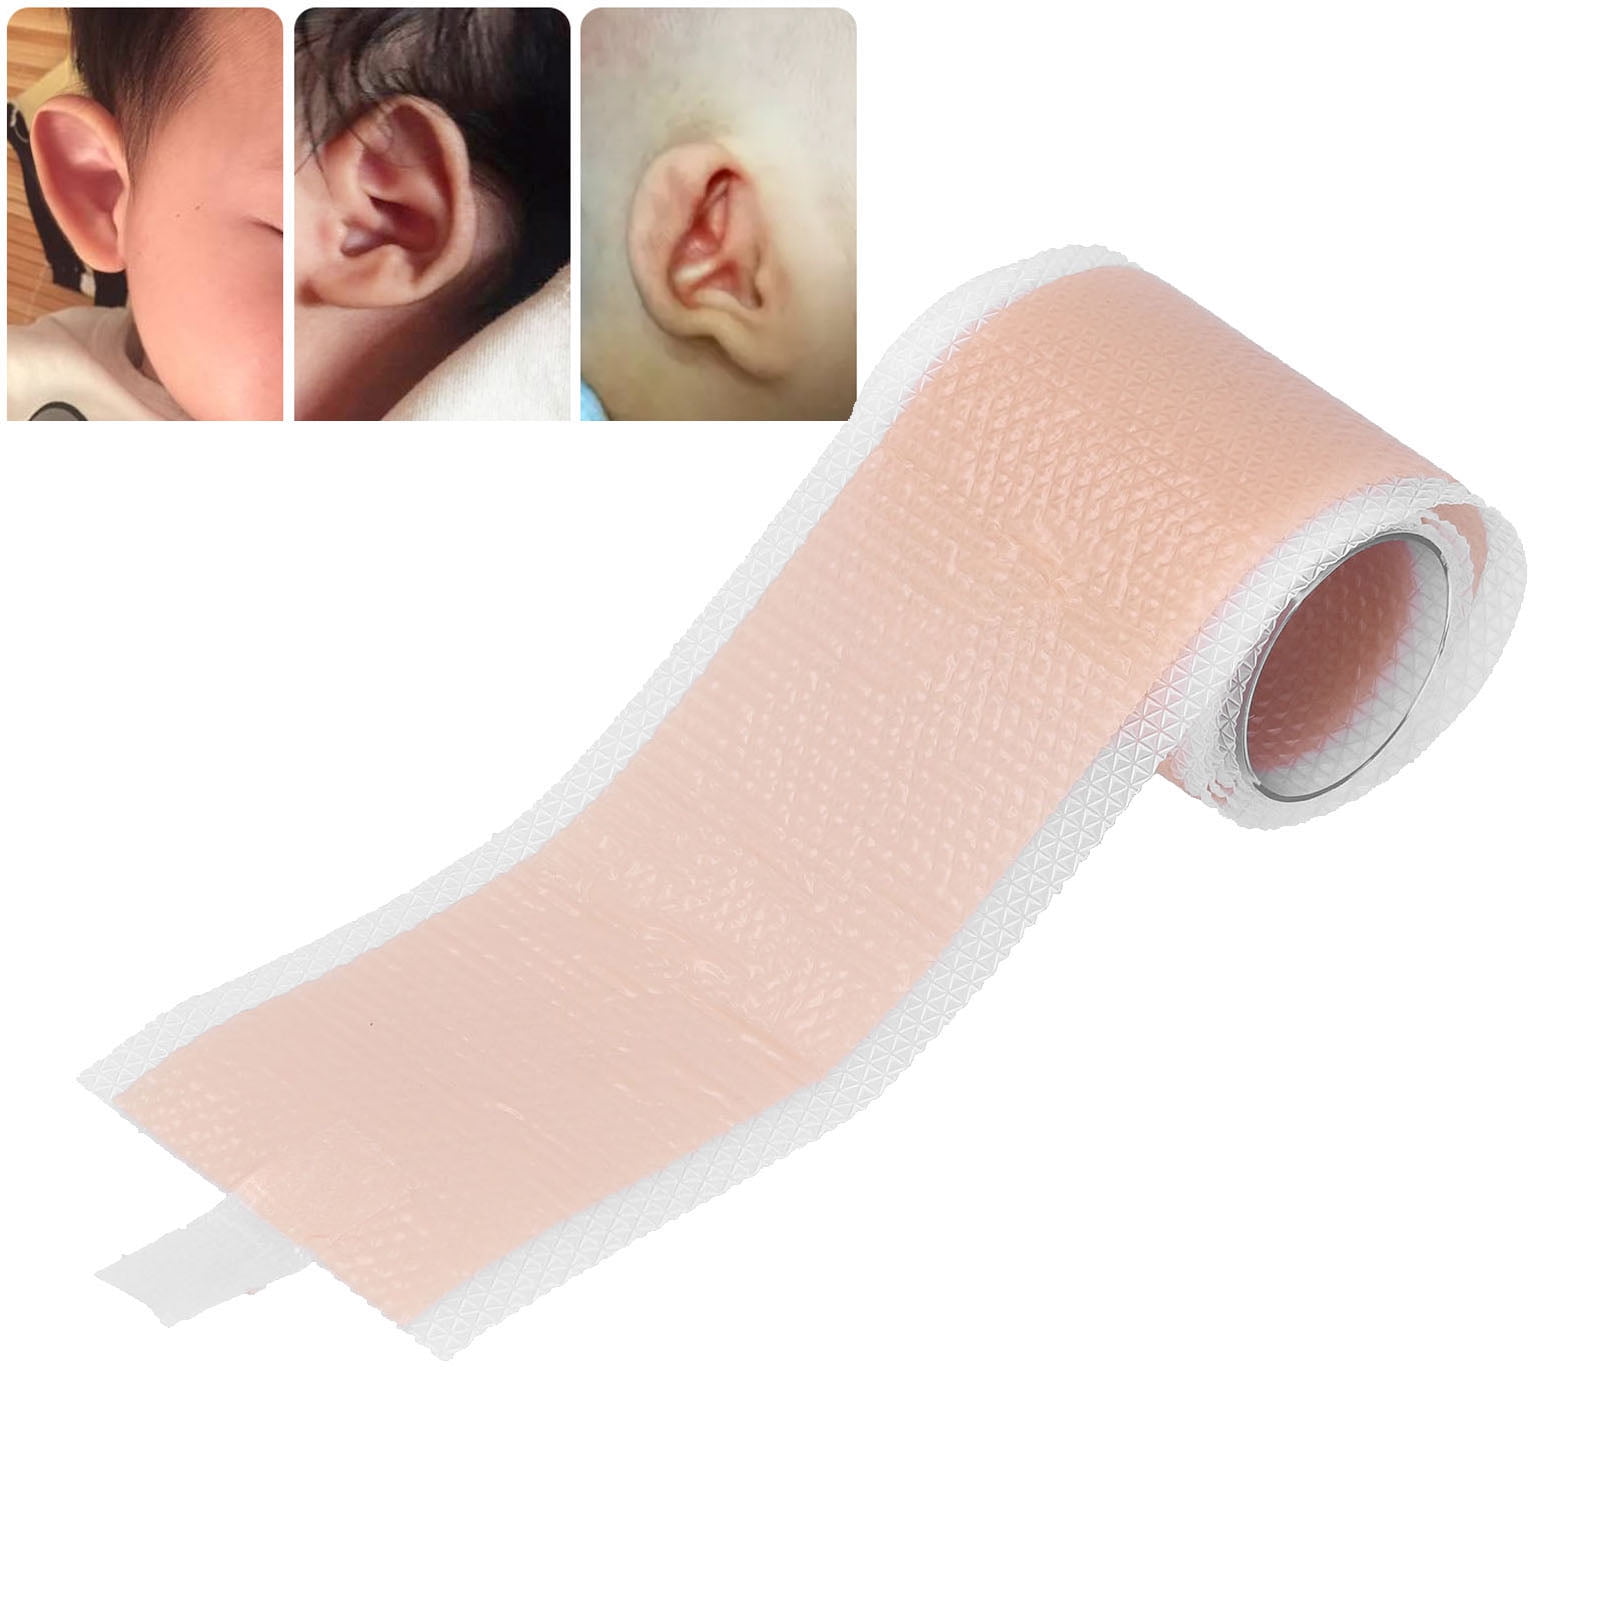 1roll Newborn Baby Ear Aesthetic Correctors Kids Infant Protruding Ear  Patch Stickers Baby Ear Correction Tape Ear Cleaner Tool - Ear Care -  AliExpress